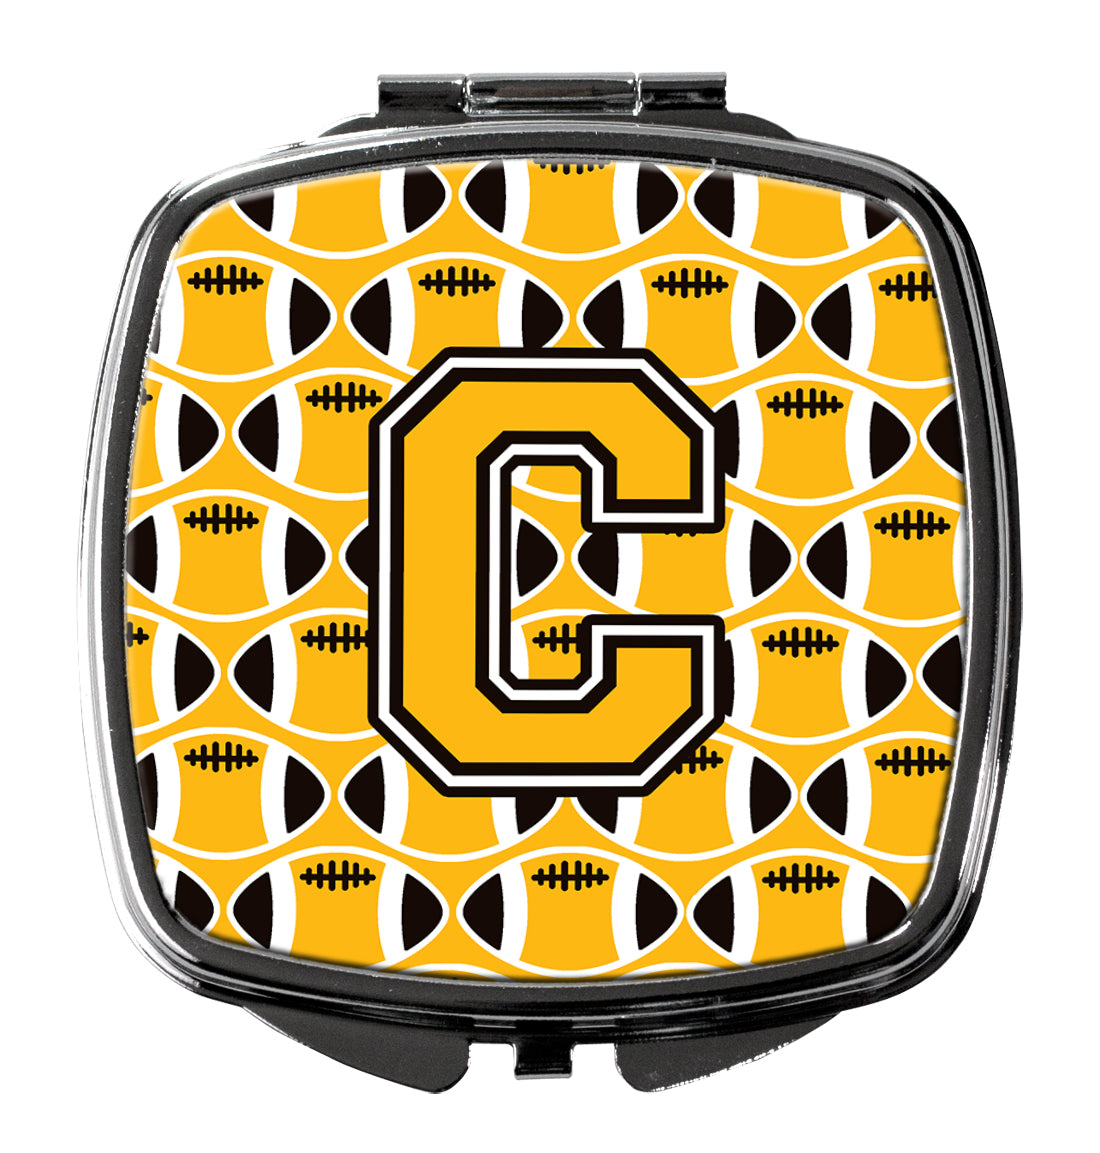 Letter C Football Black, Old Gold and White Compact Mirror CJ1080-CSCM